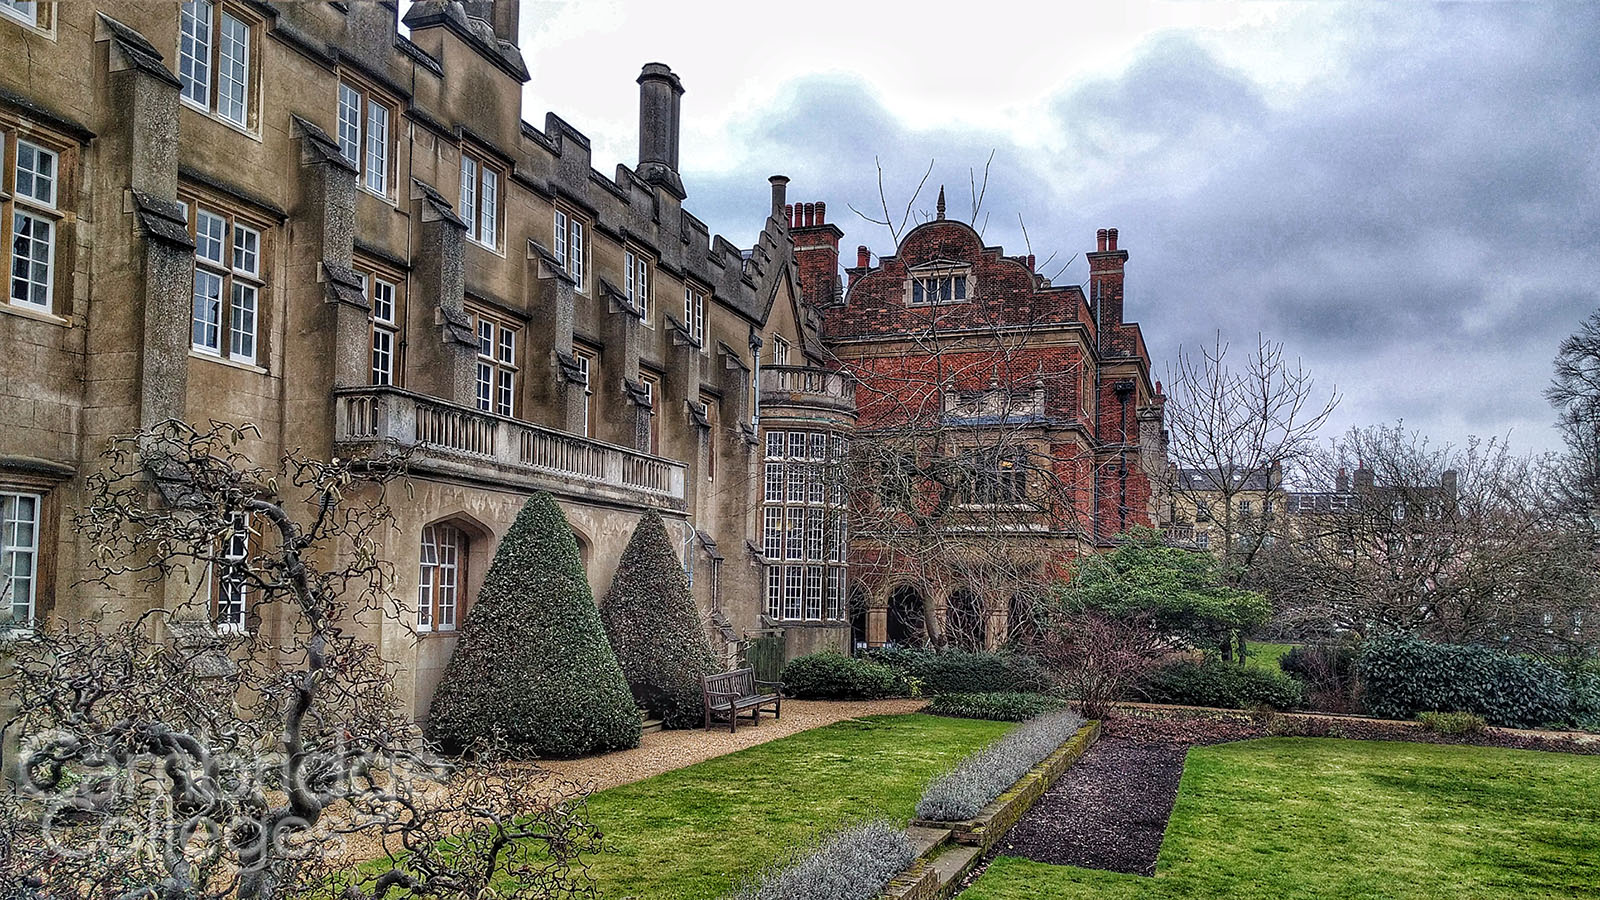 Master's lodge and gardens at Sidney Sussex